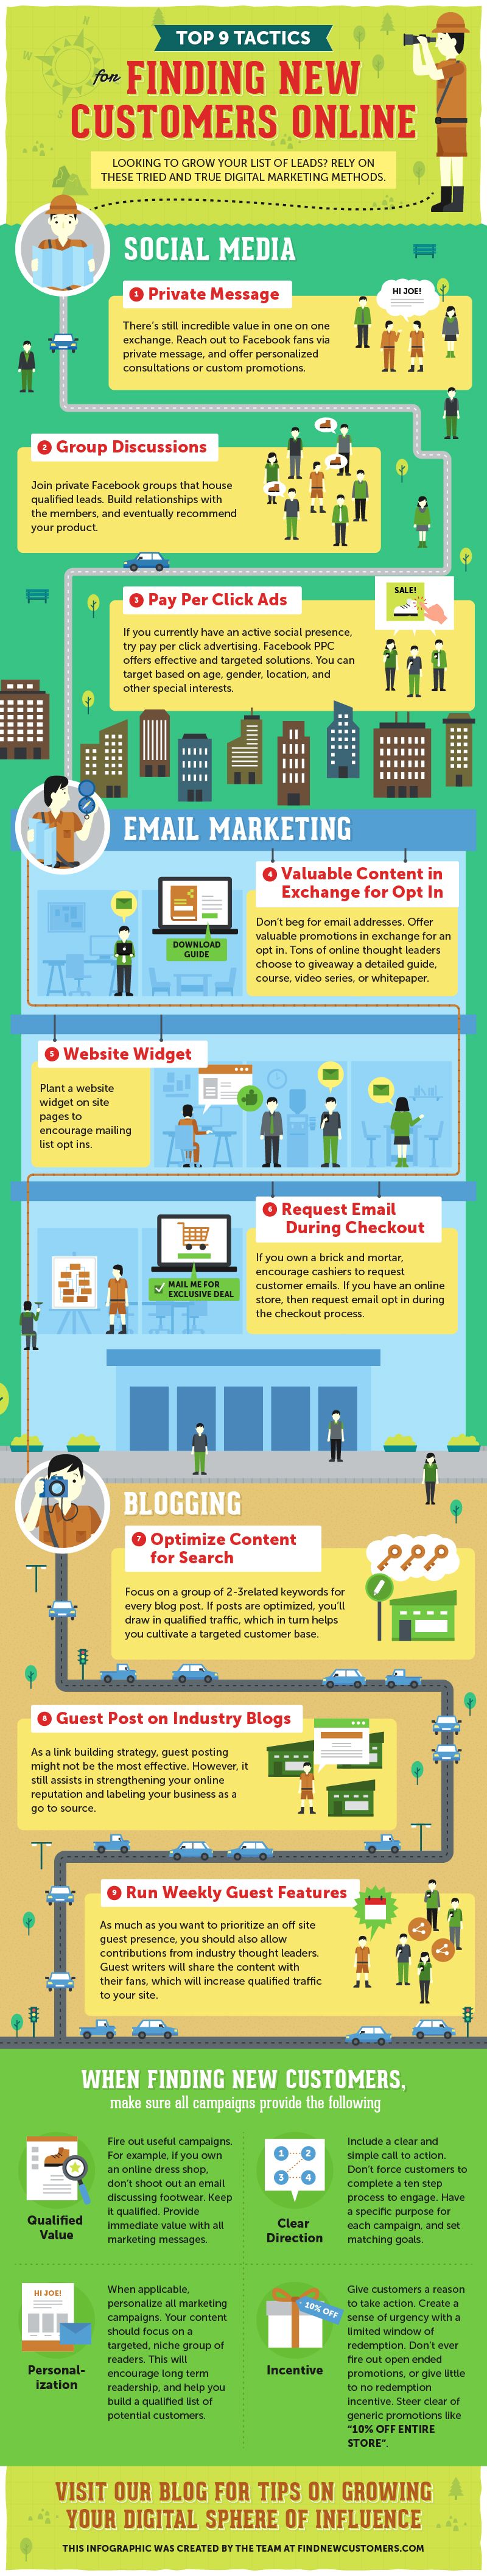 Social Media, Email Marketing & Blogging: Top 9 Tips and Tricks for Finding New Customers Online – Infographic